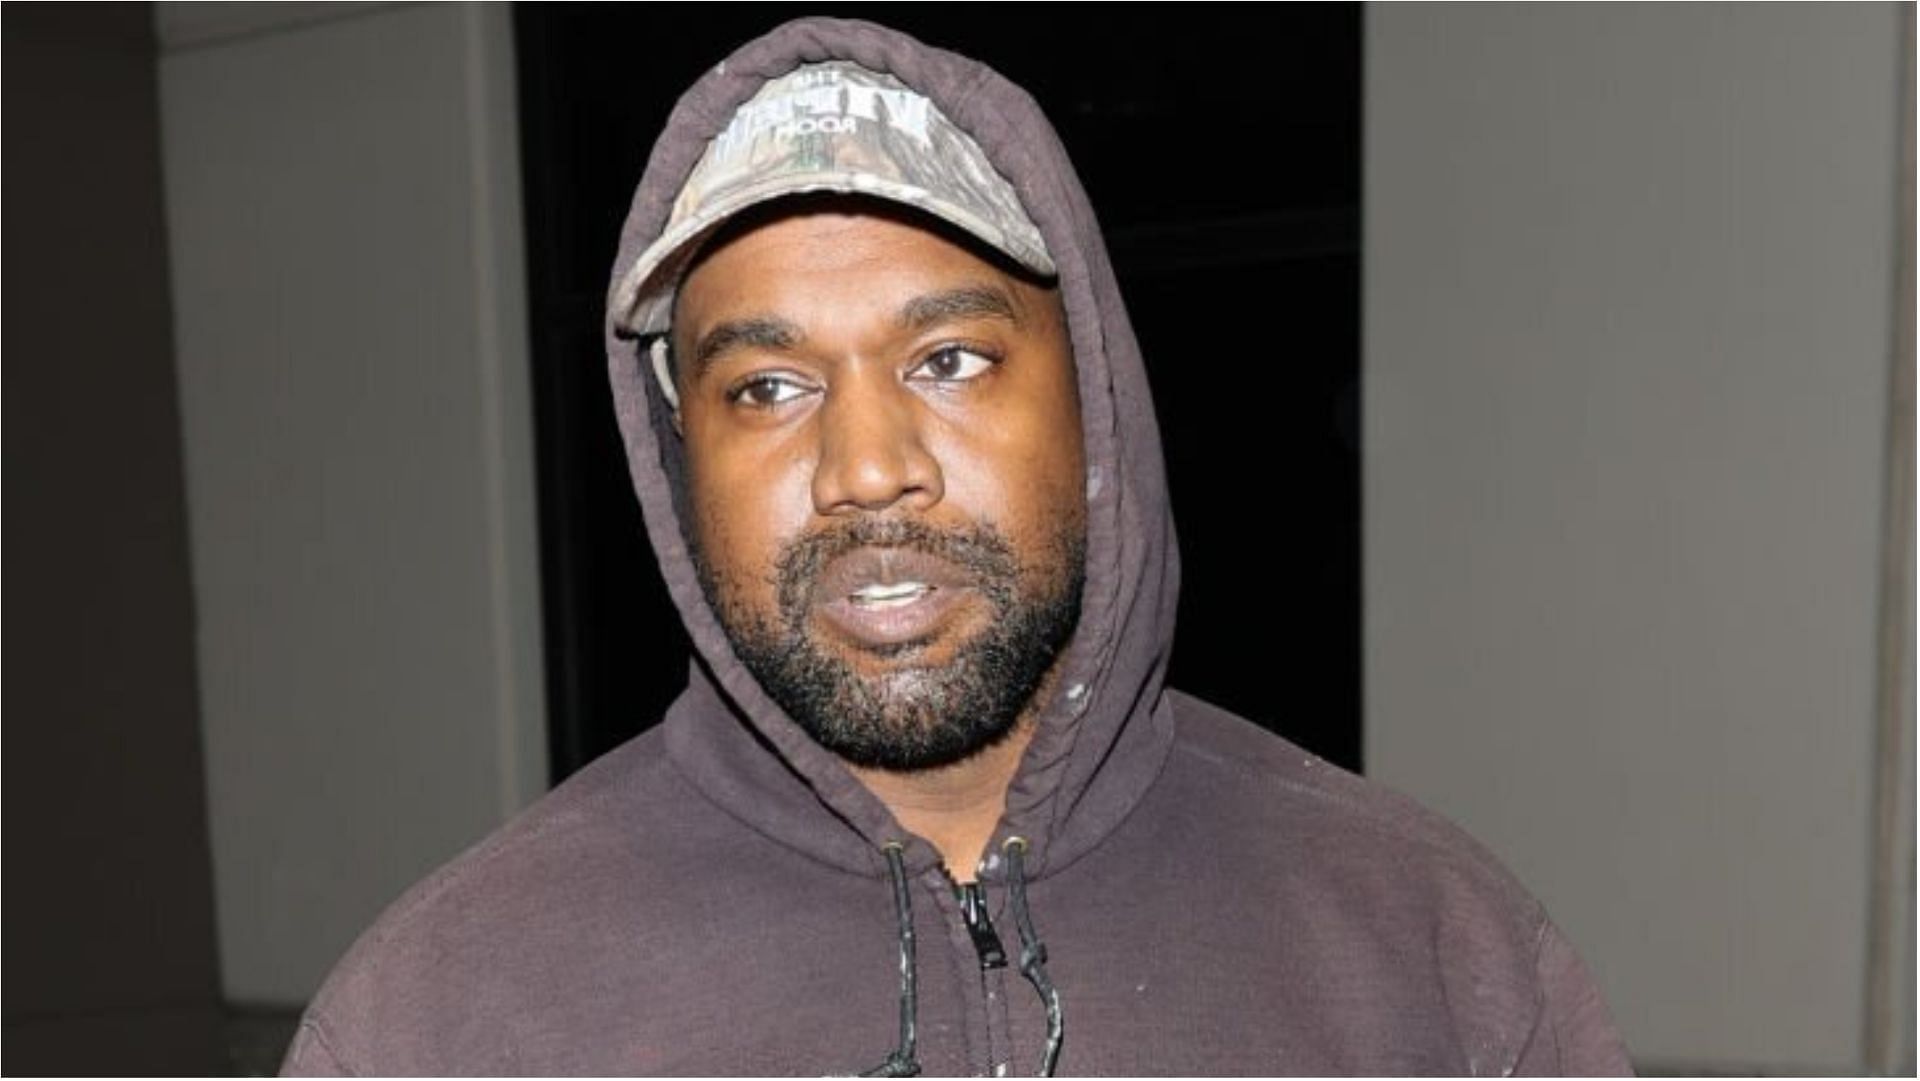 Is Kanye West a billionaire? Rapper's net worth 'obliterated' according